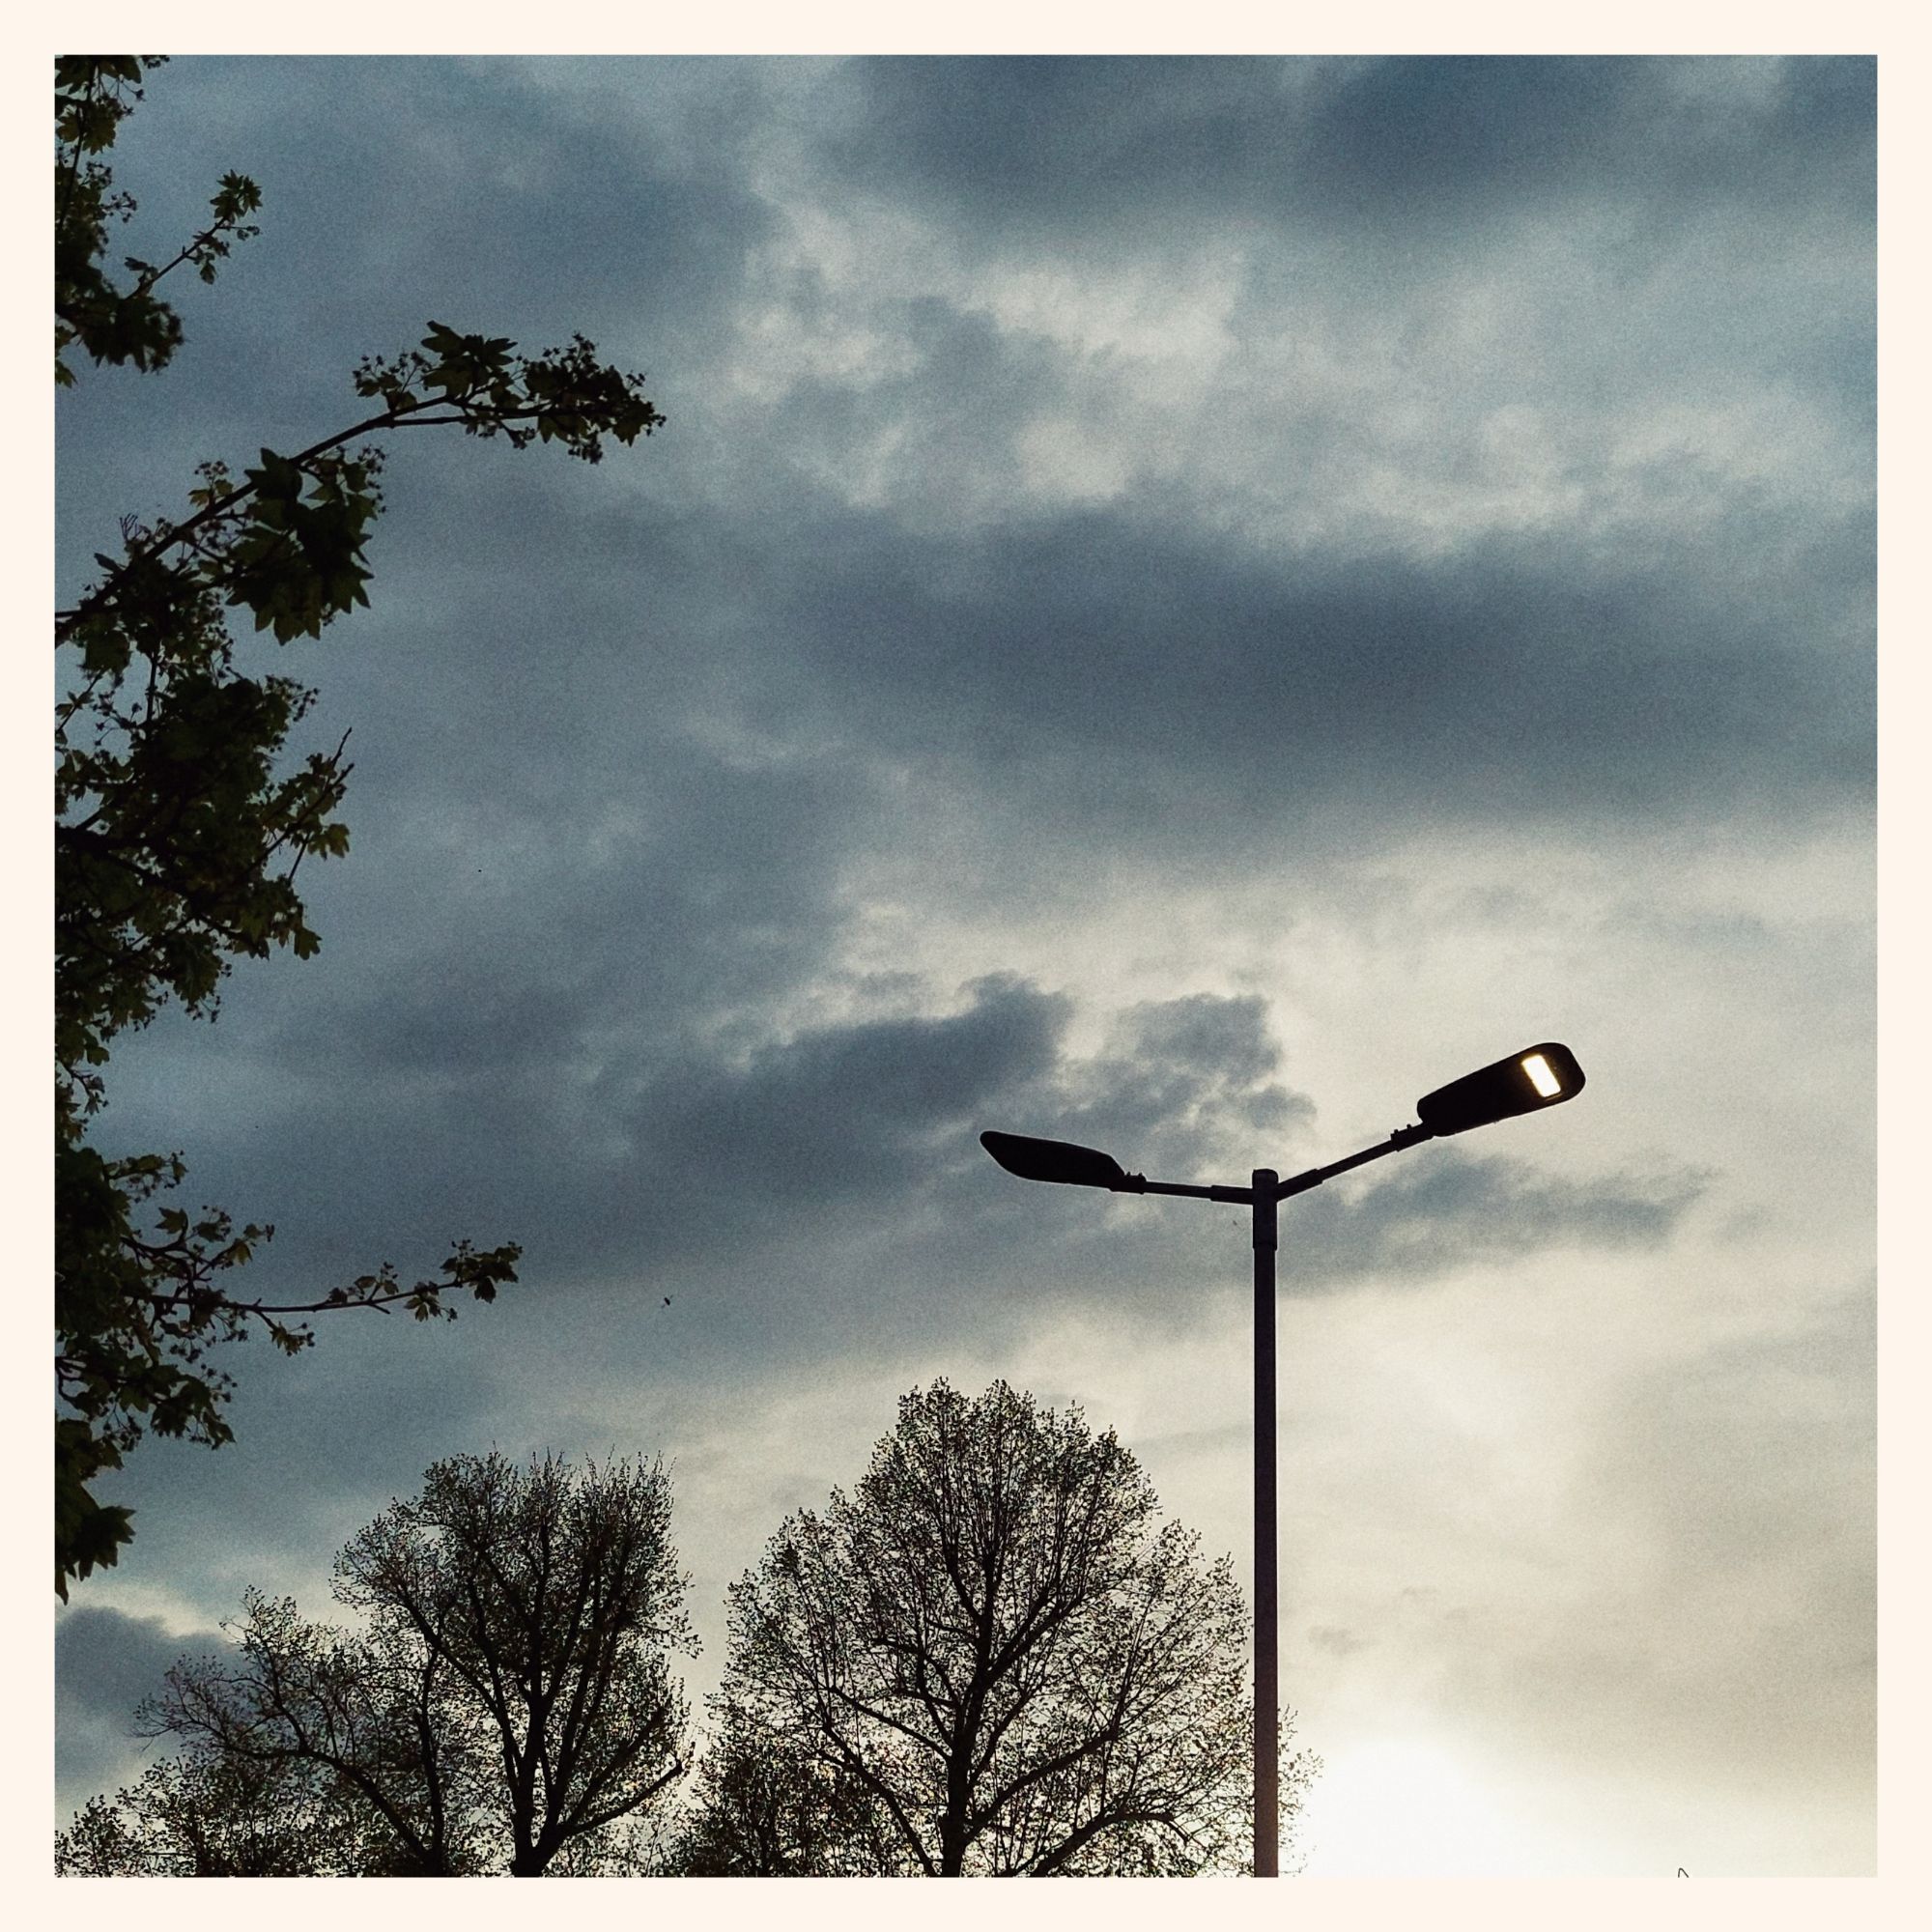 Clouds in front of sunset sky. City trees and a streetlight.